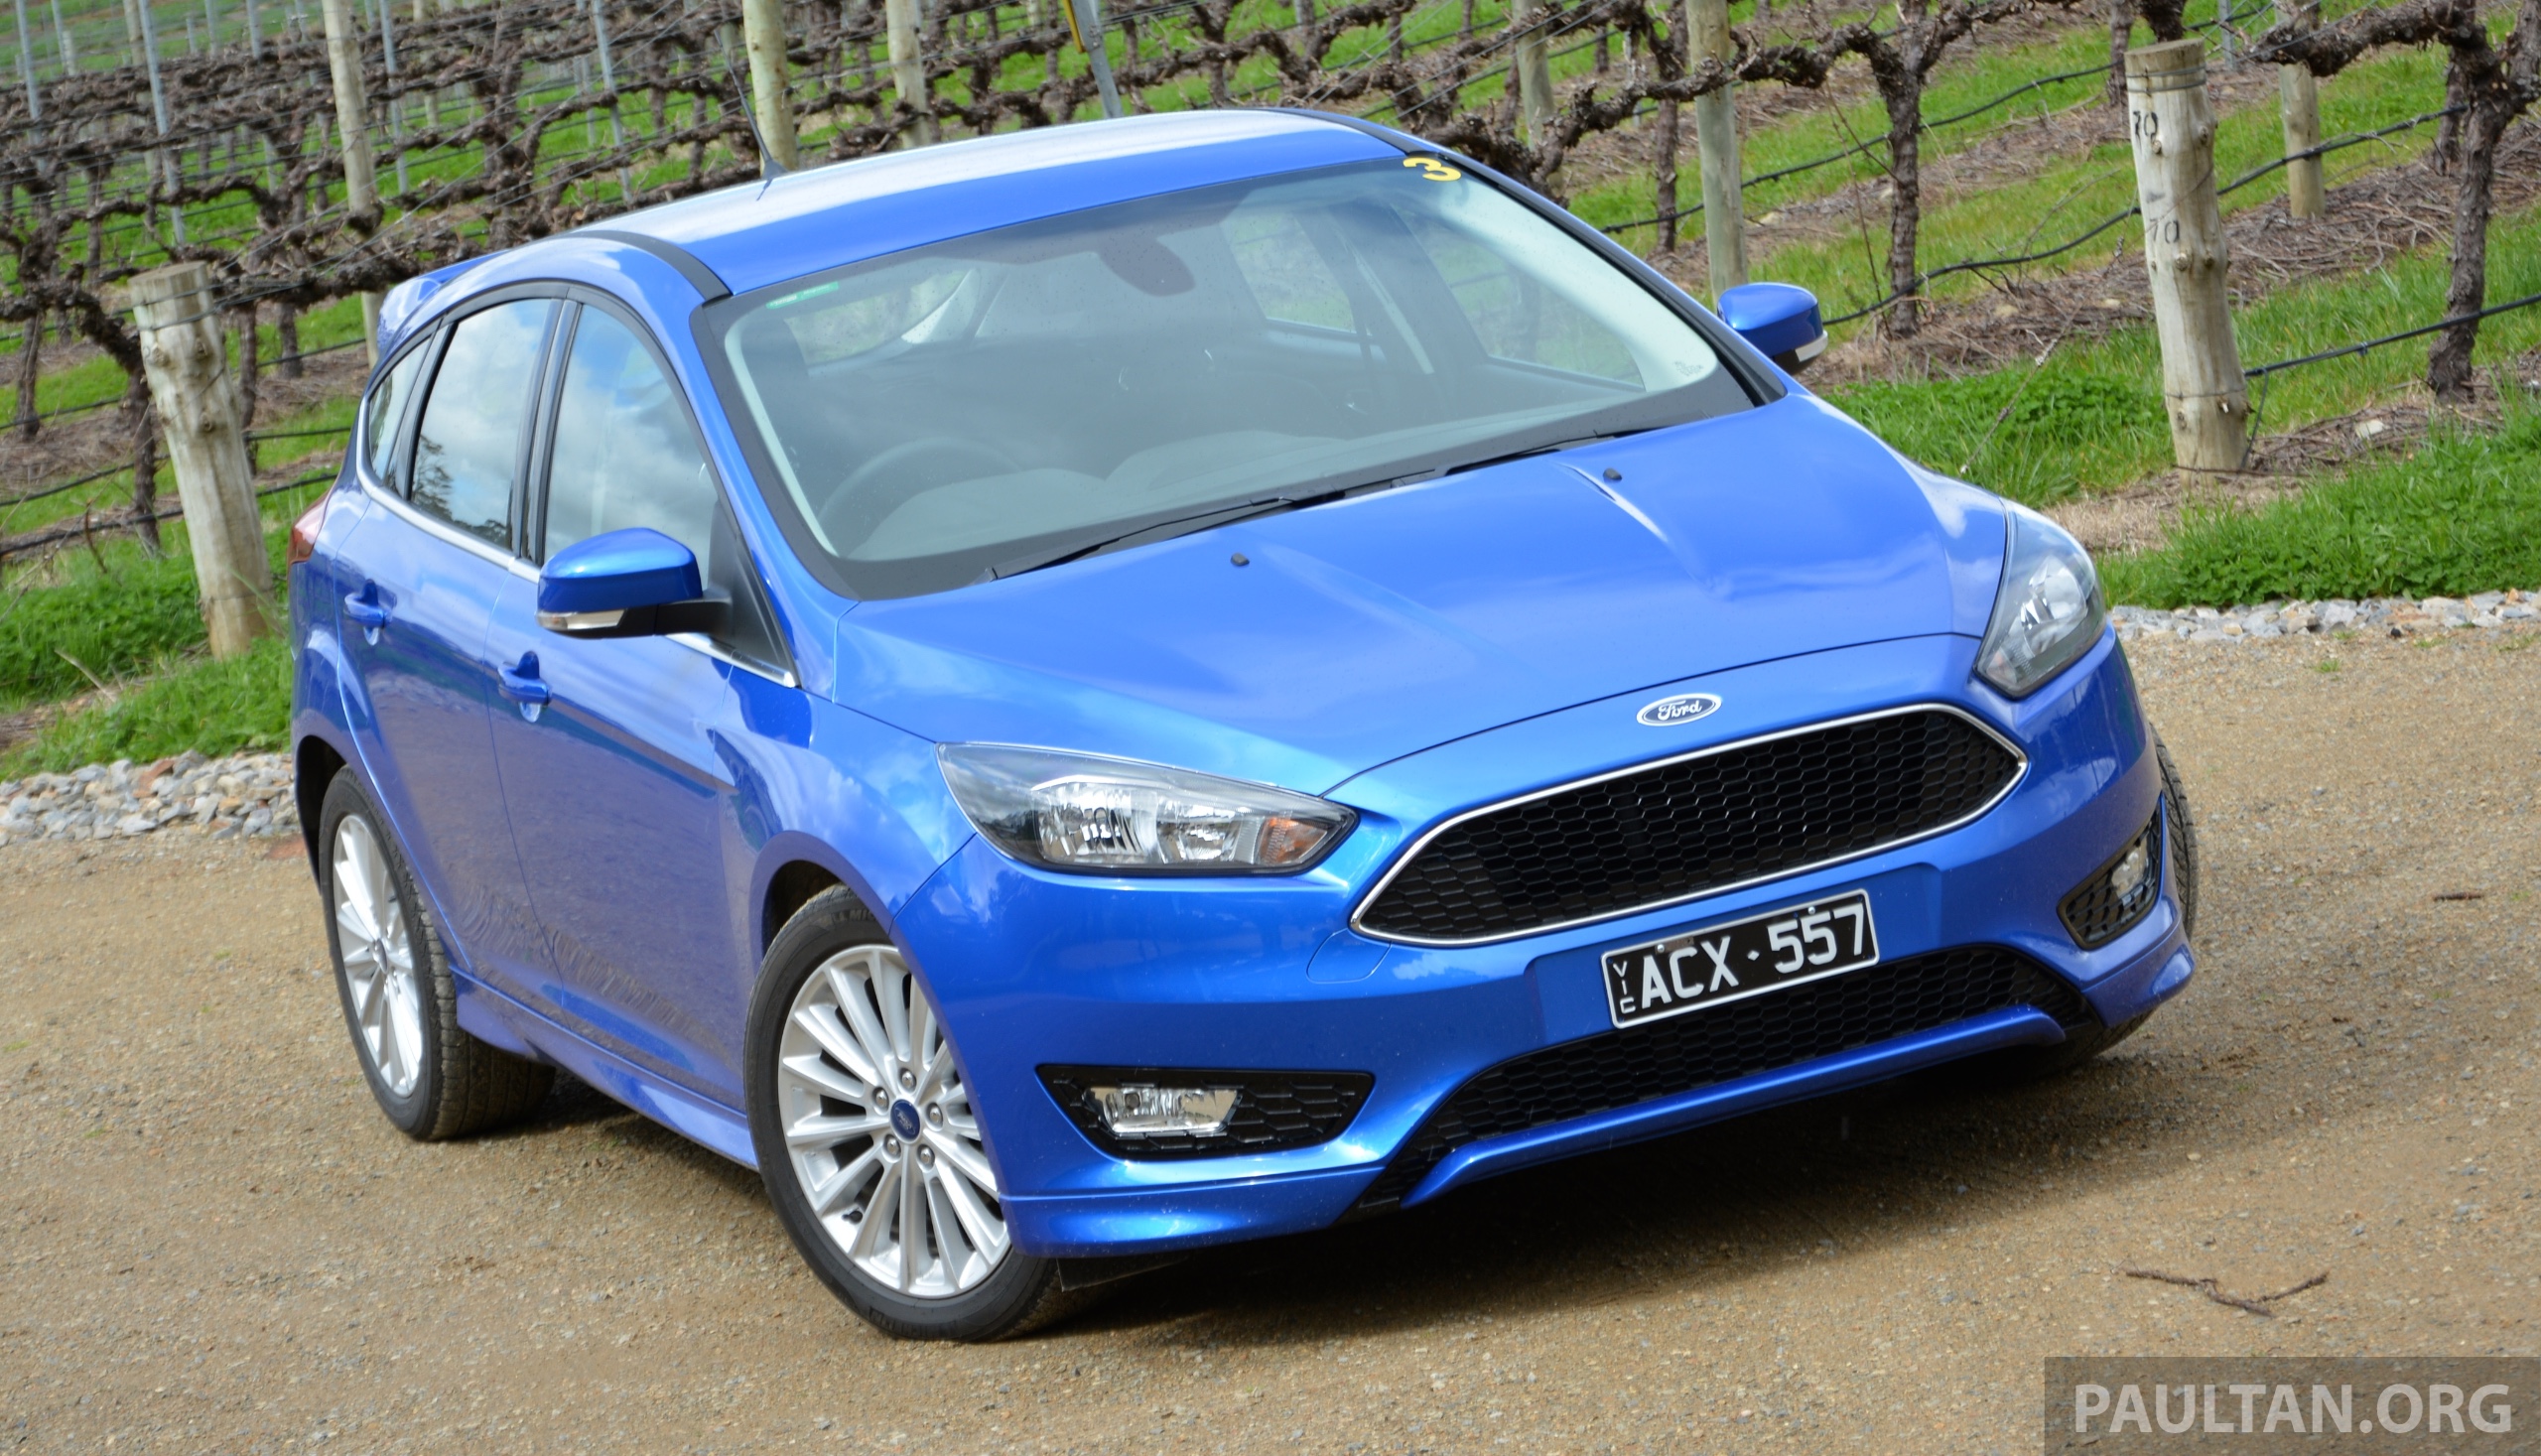 Ford Focus ST [C346] (2015 - 2017) used car review, Car review